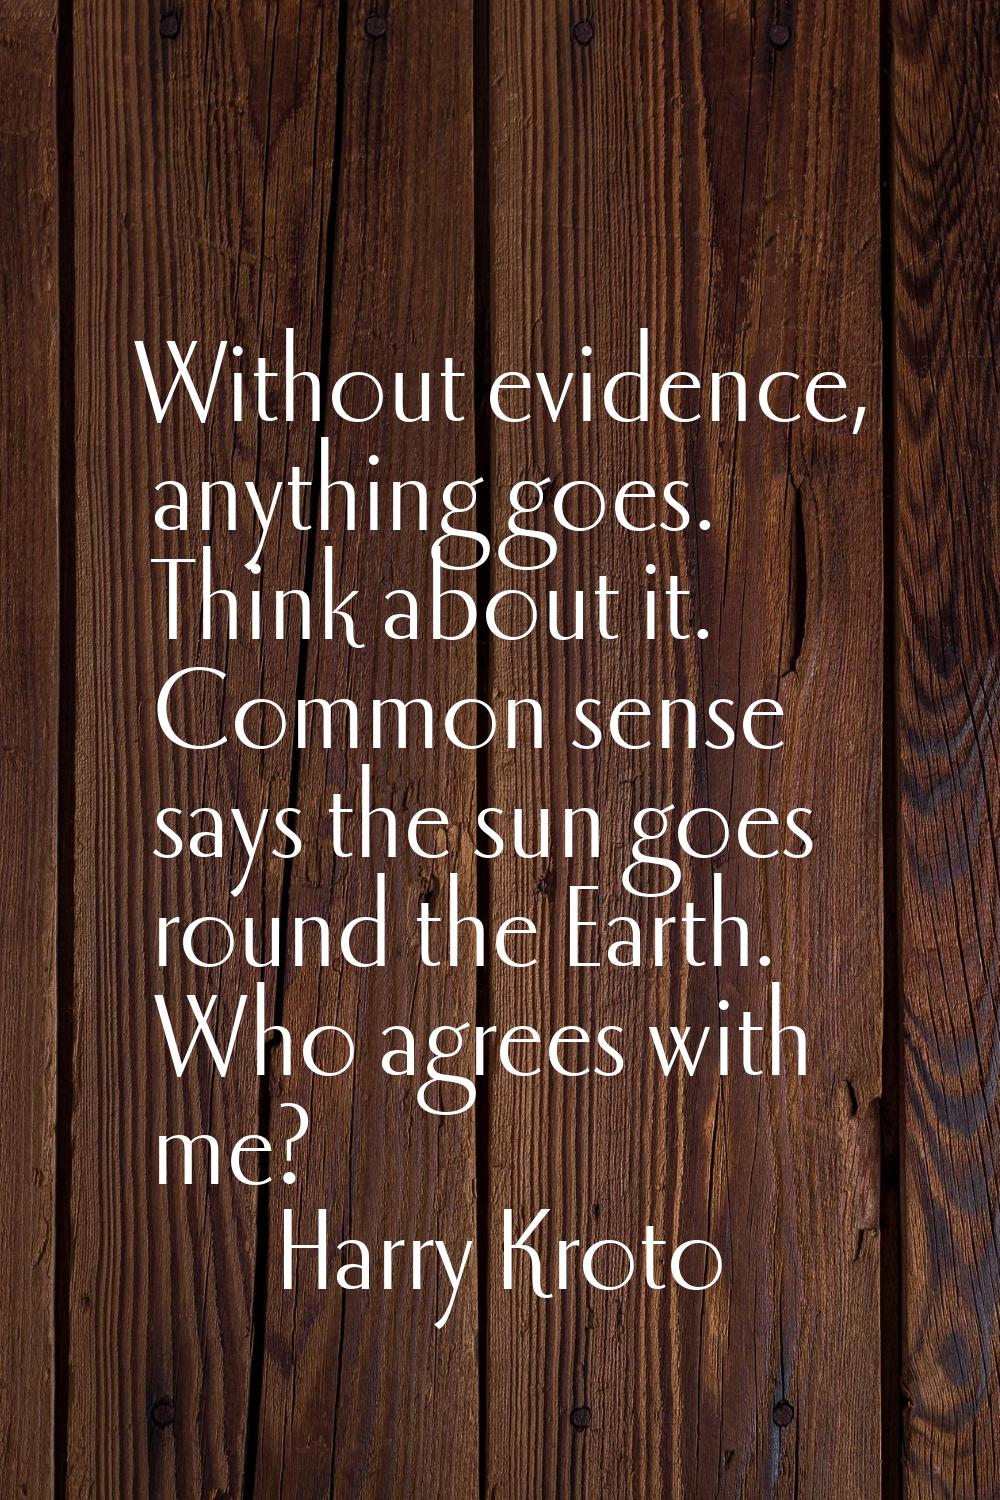 Without evidence, anything goes. Think about it. Common sense says the sun goes round the Earth. Wh